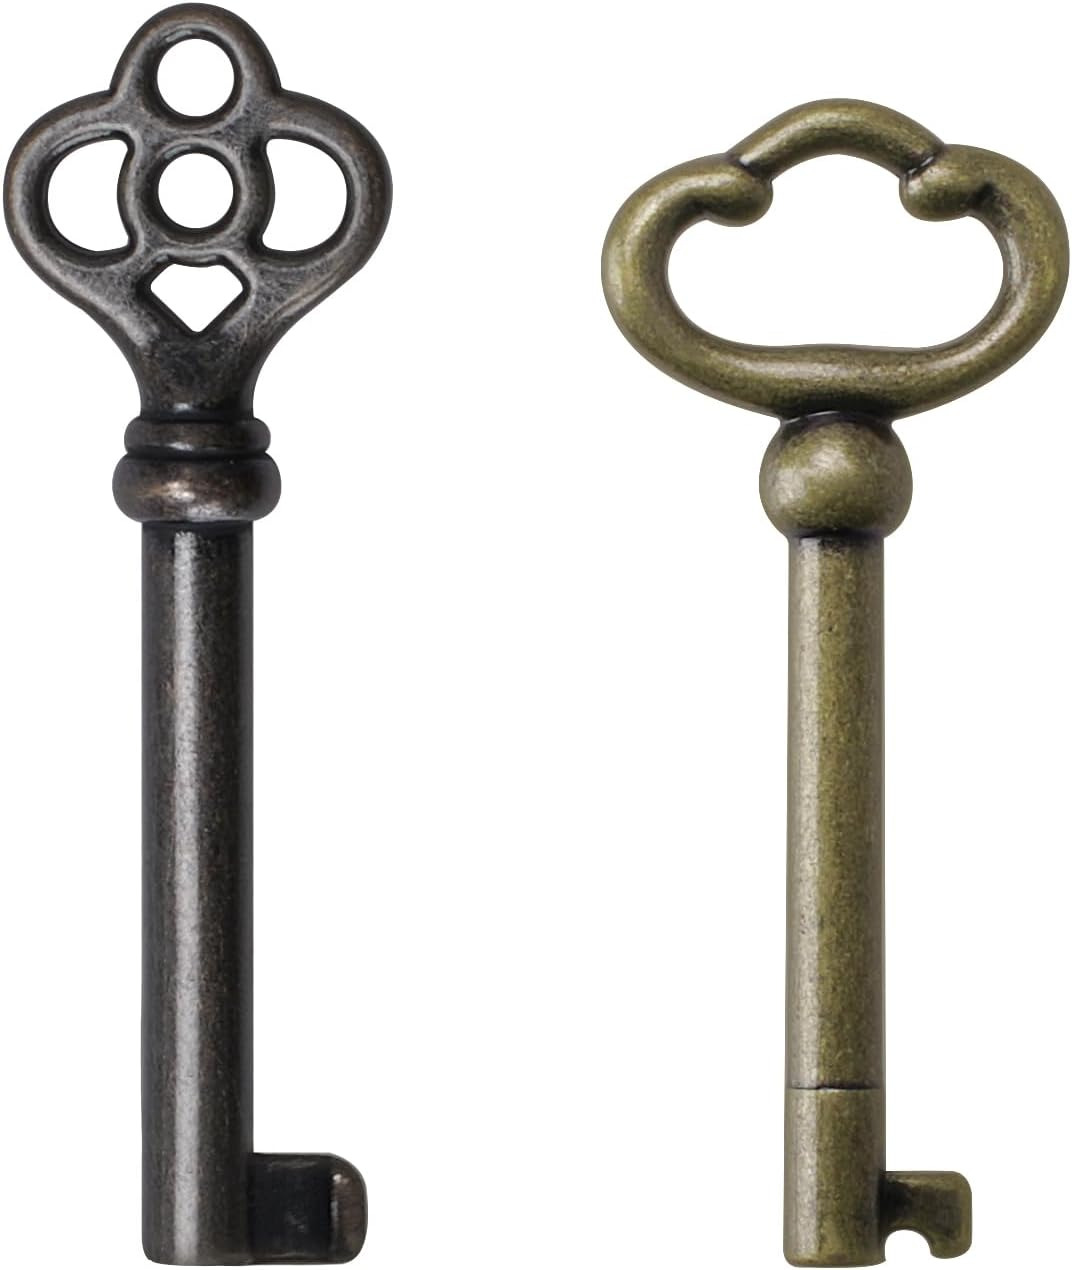 KY-2AB and KY-3AB Hollow Barrel Skeleton Key,Universal Barrel Key Replacement,An